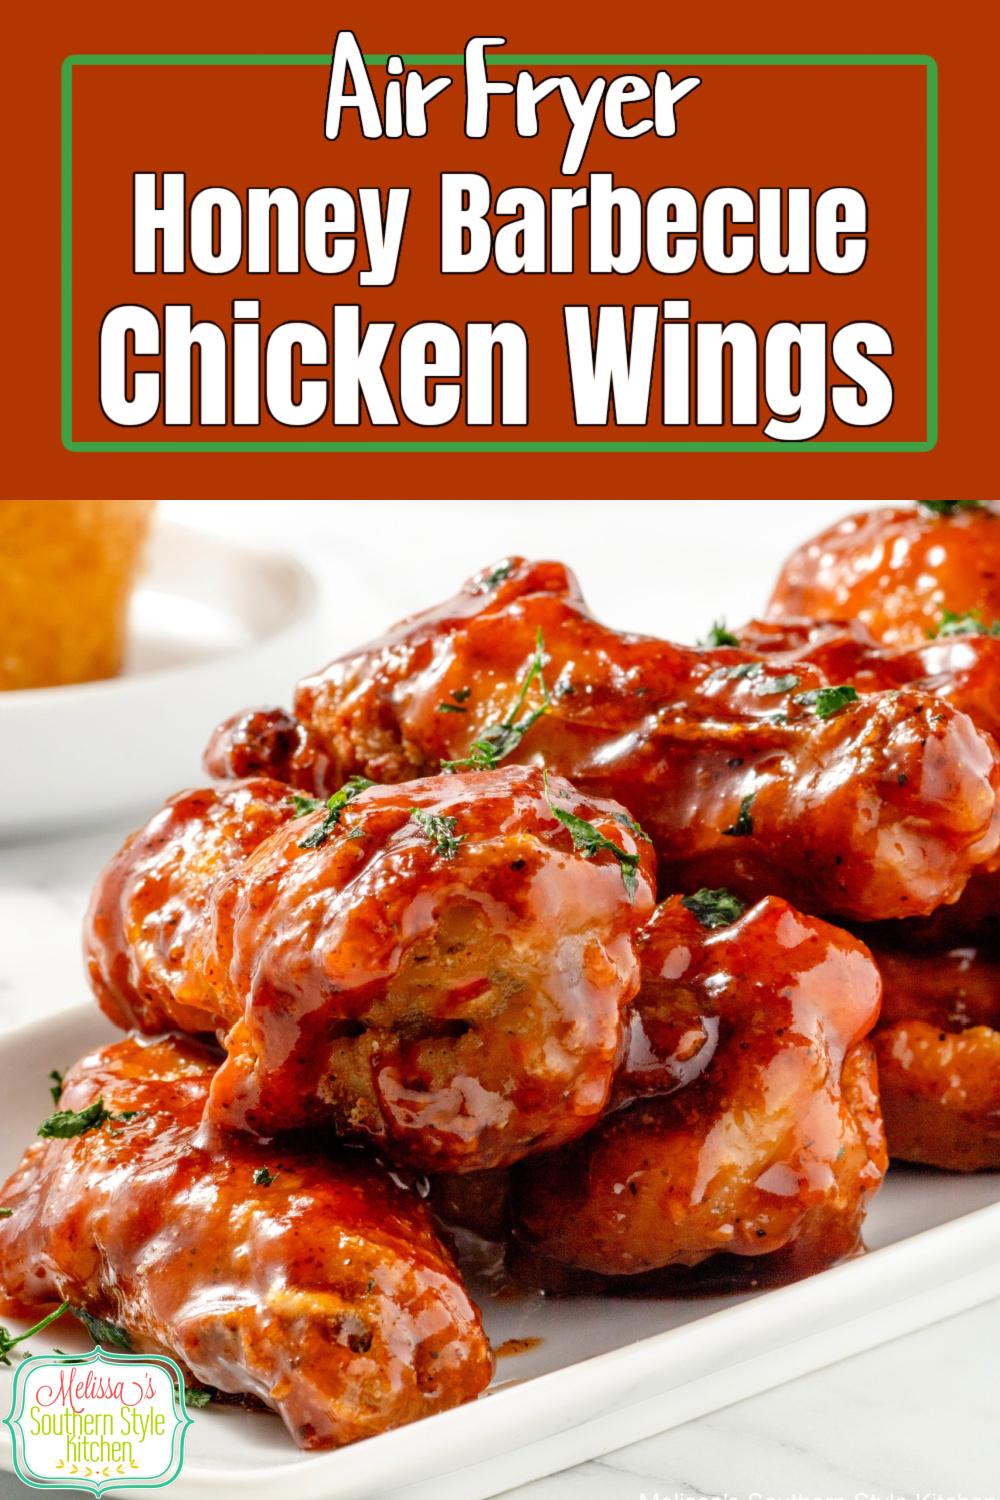 Make these sweet and sticky Honey Barbecue Chicken Wings in an air fryer or oven! #barbecuechicken #honeybarbecuewings #airfryerwings #airfryerhoneybarbecuechickenwings #easywingsrecipes #superbowlrecipes #airfryerrecipes via @melissasssk